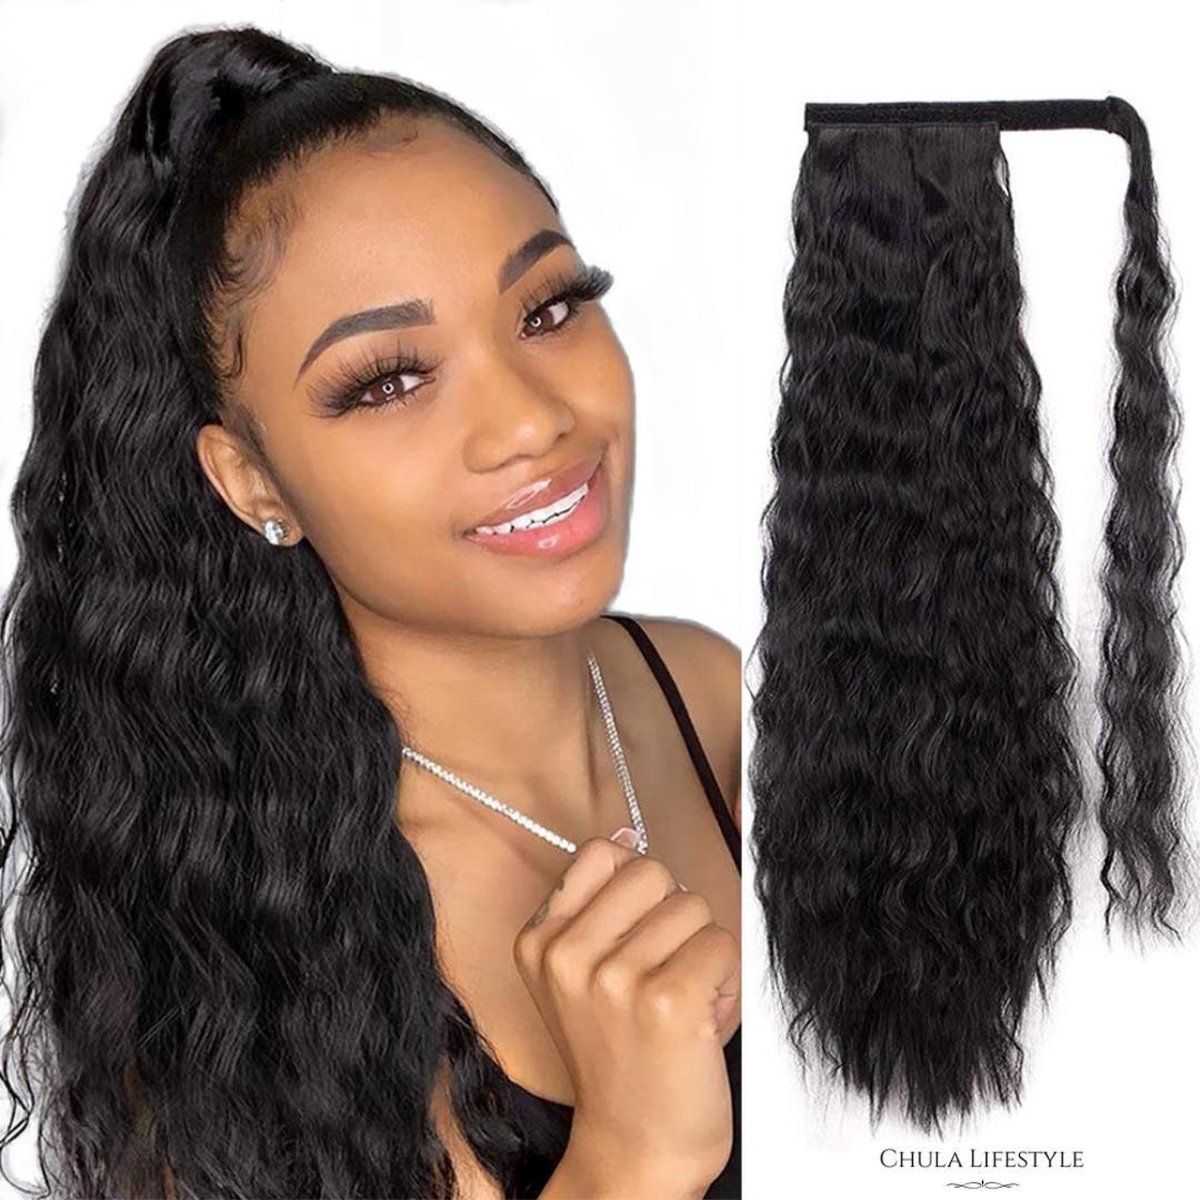 Chula Lifestyle Paardenstaart Haar Extension Zwart Lang Krullend Golvend 56 cm - Ponytail Extensions Black Long Curly Wavy 22 inch - Chula Lifestyle